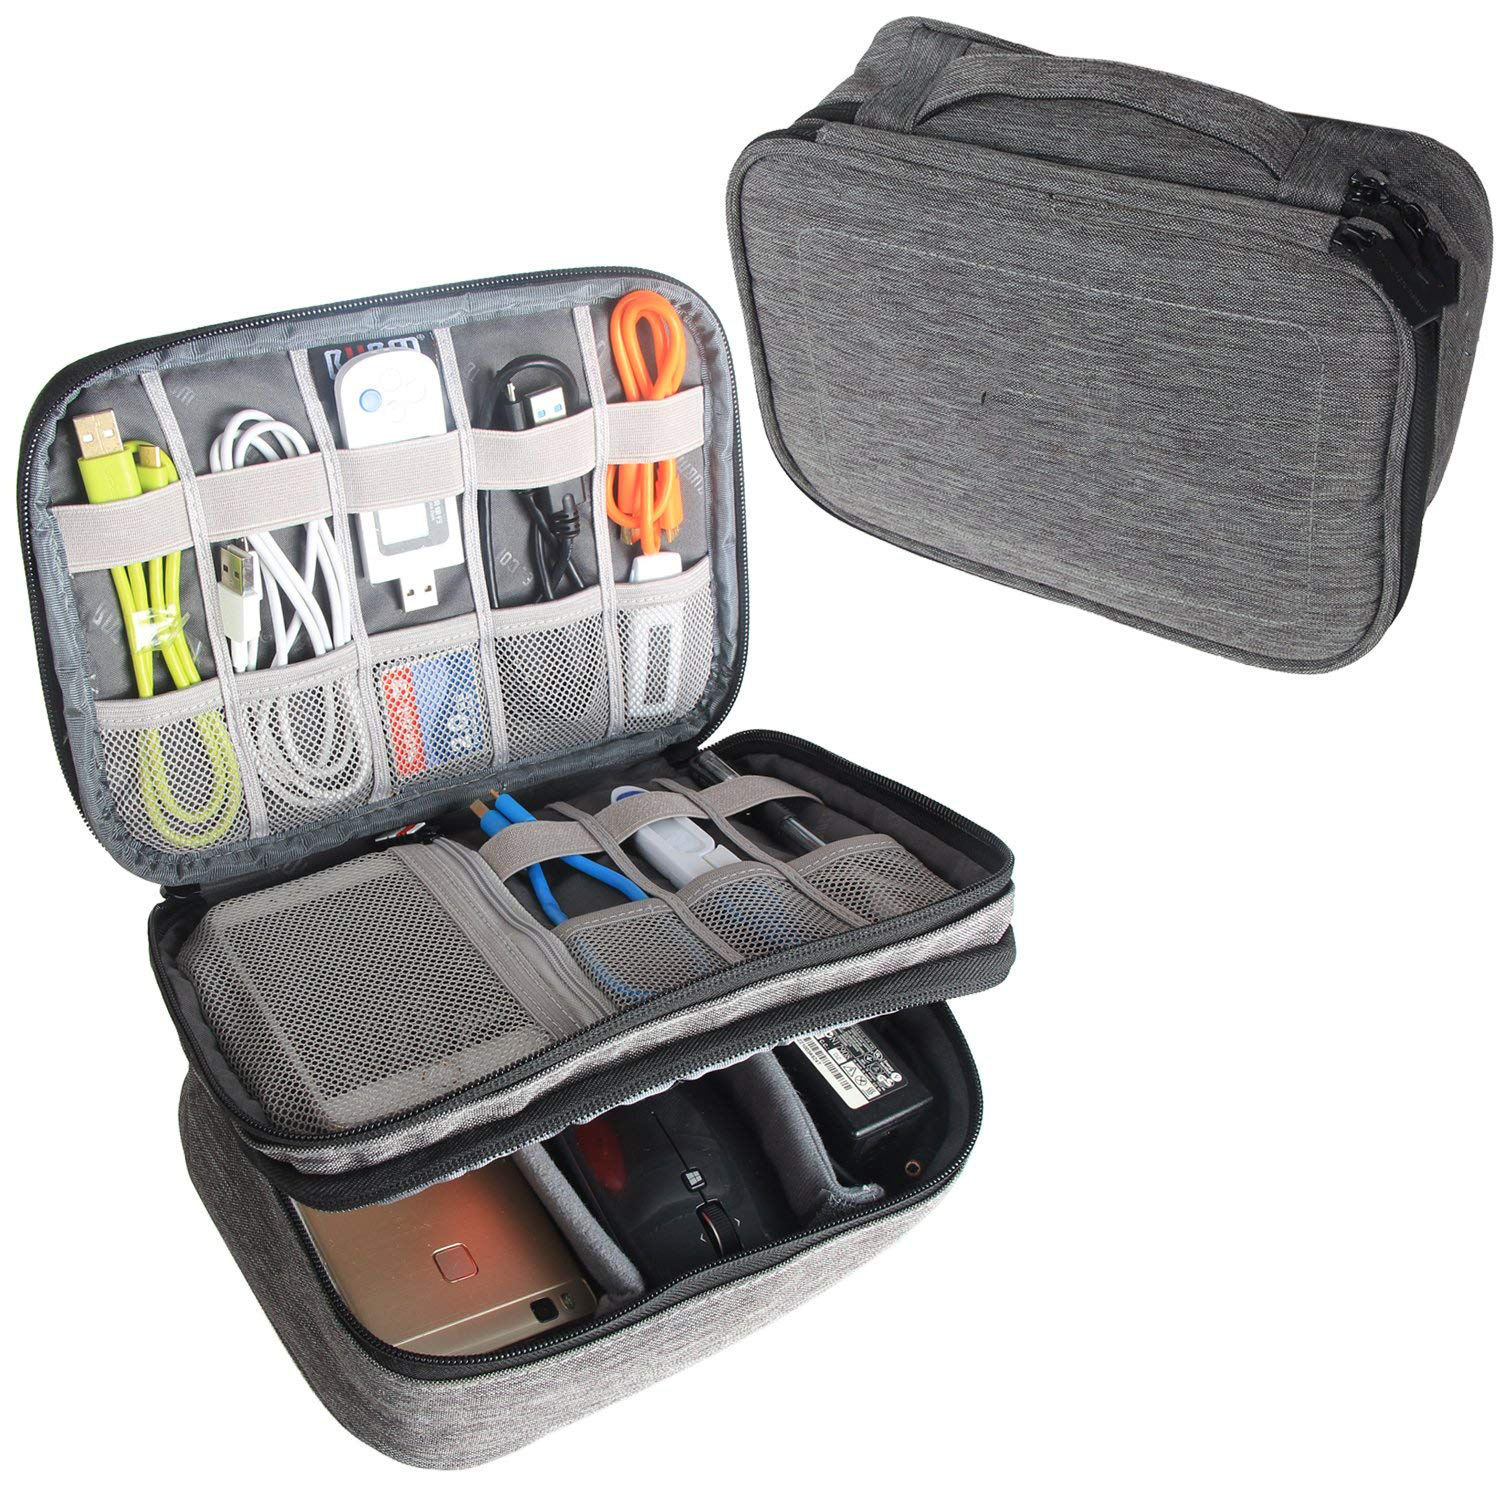 Cable Organizer Box Bag Product Details